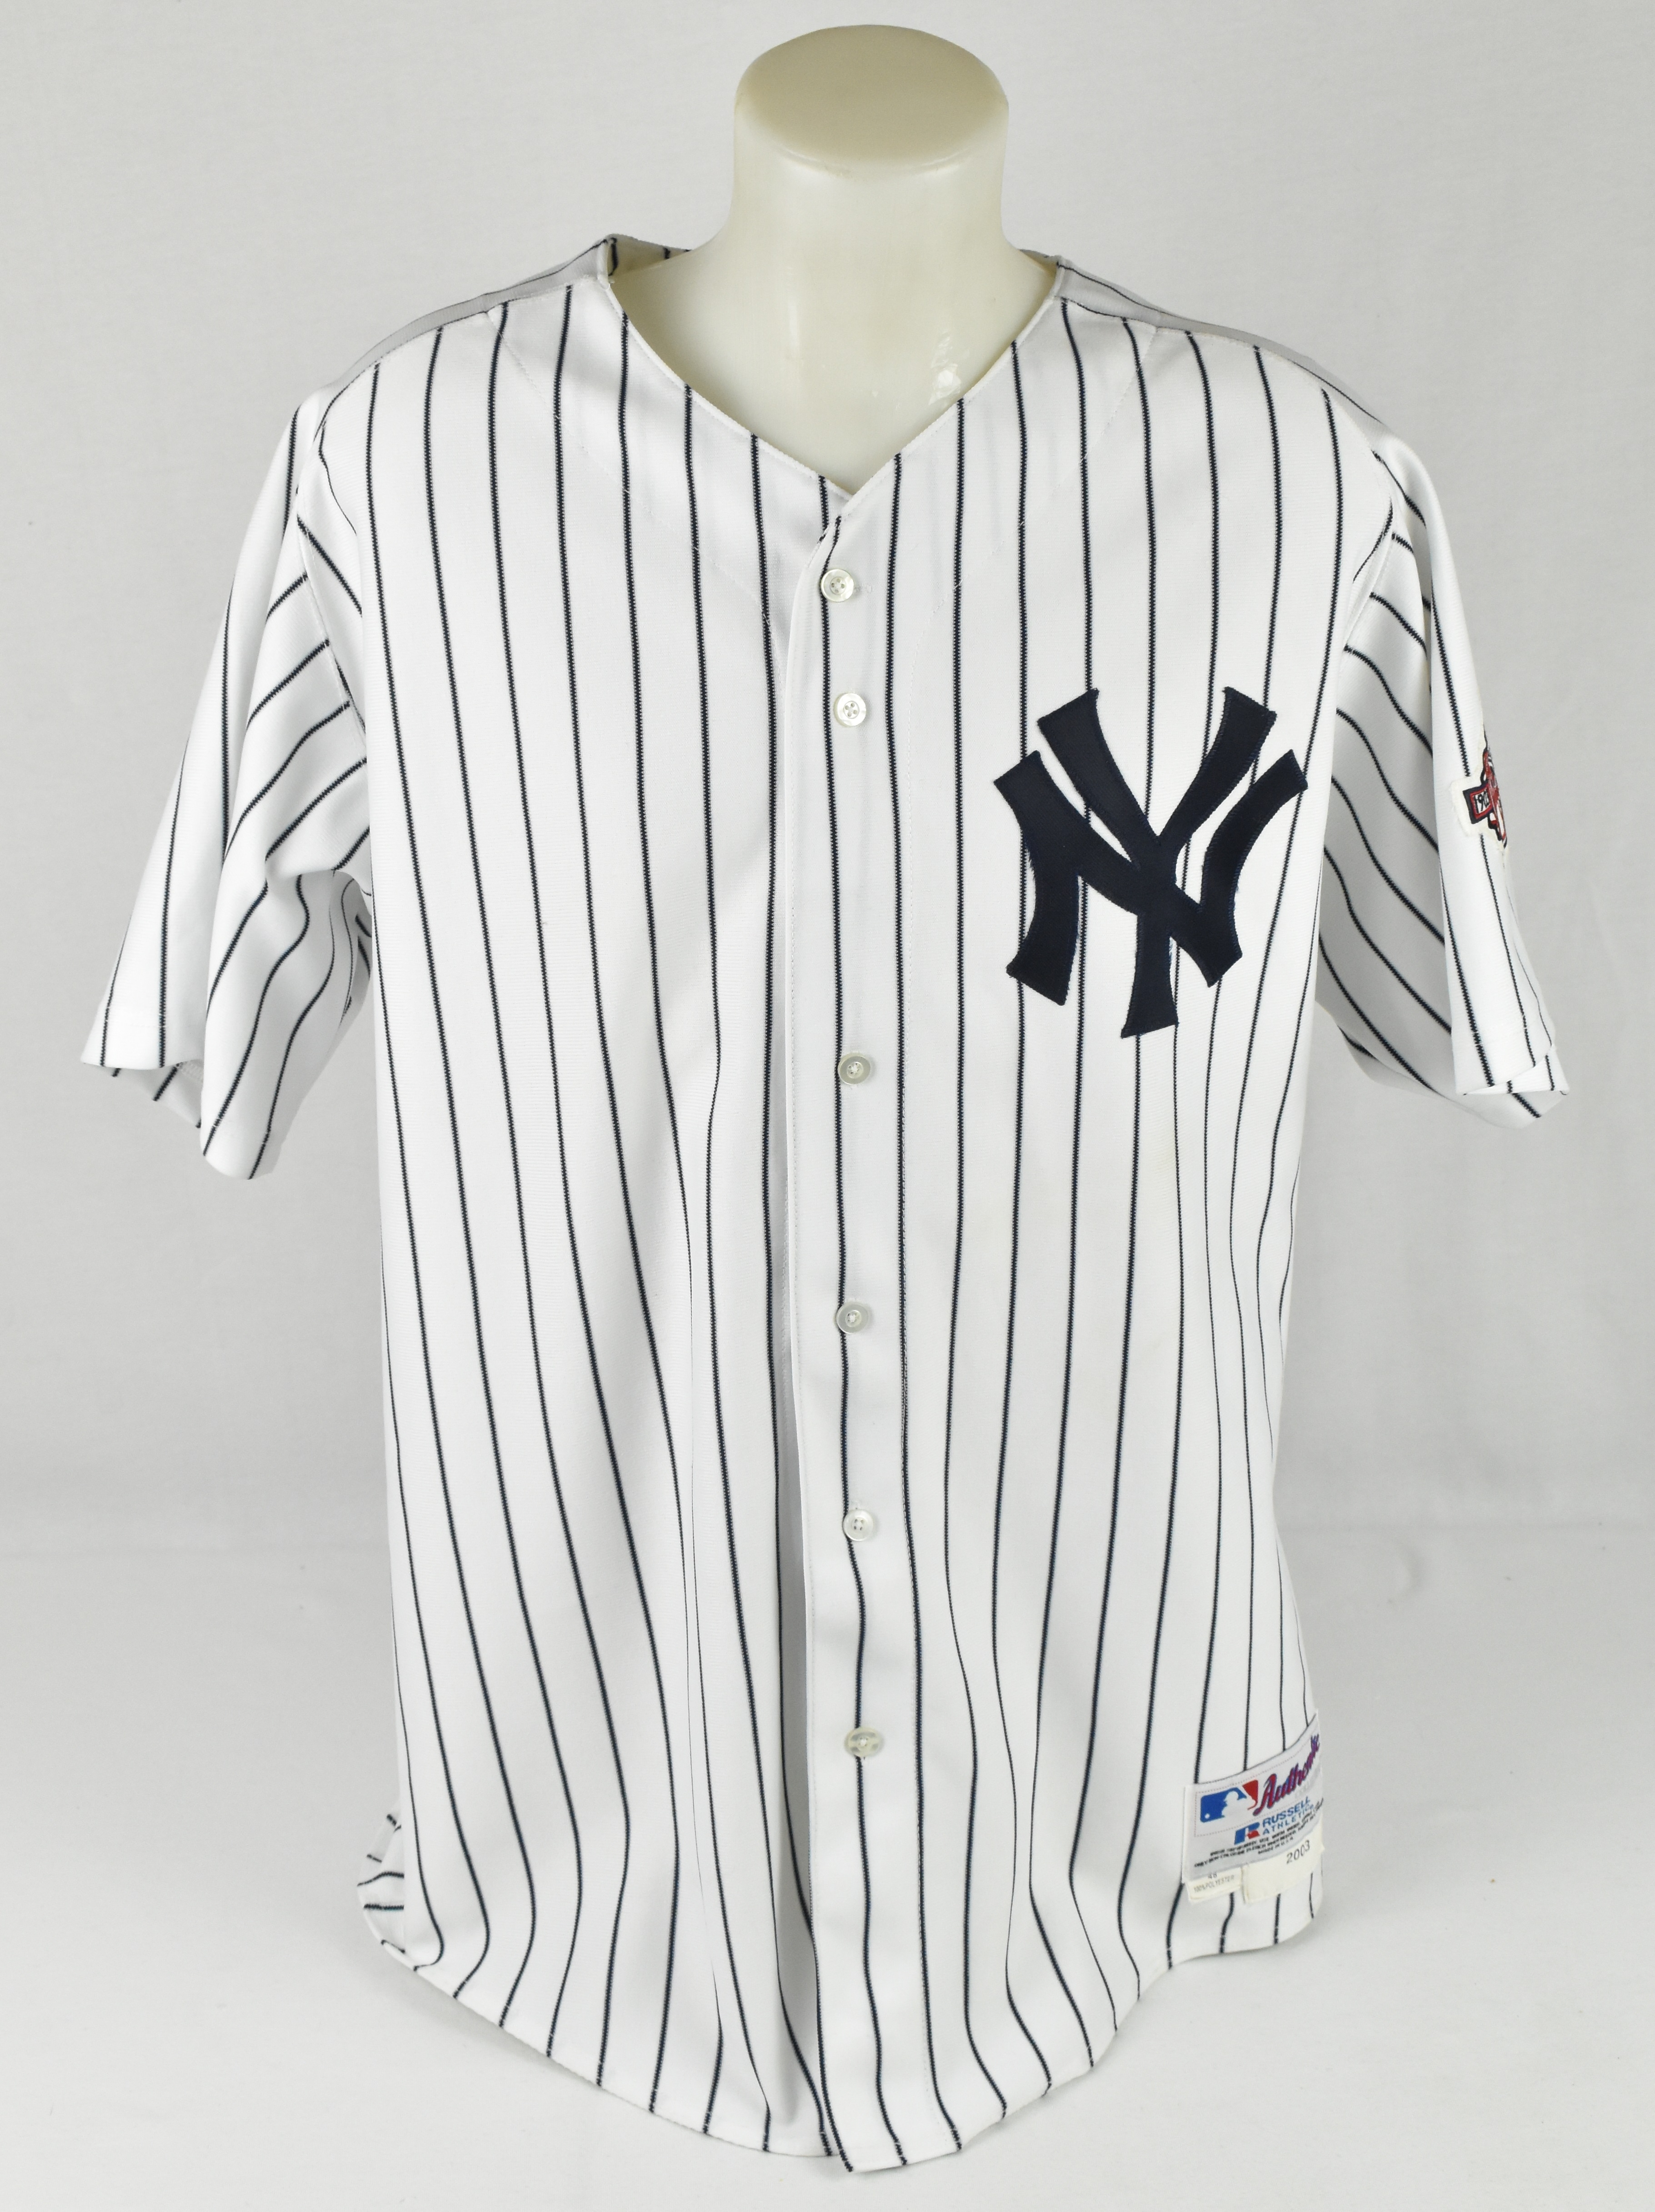 Vintage Authentic Russell 2003 World Series Yankees Jersey SZ 56